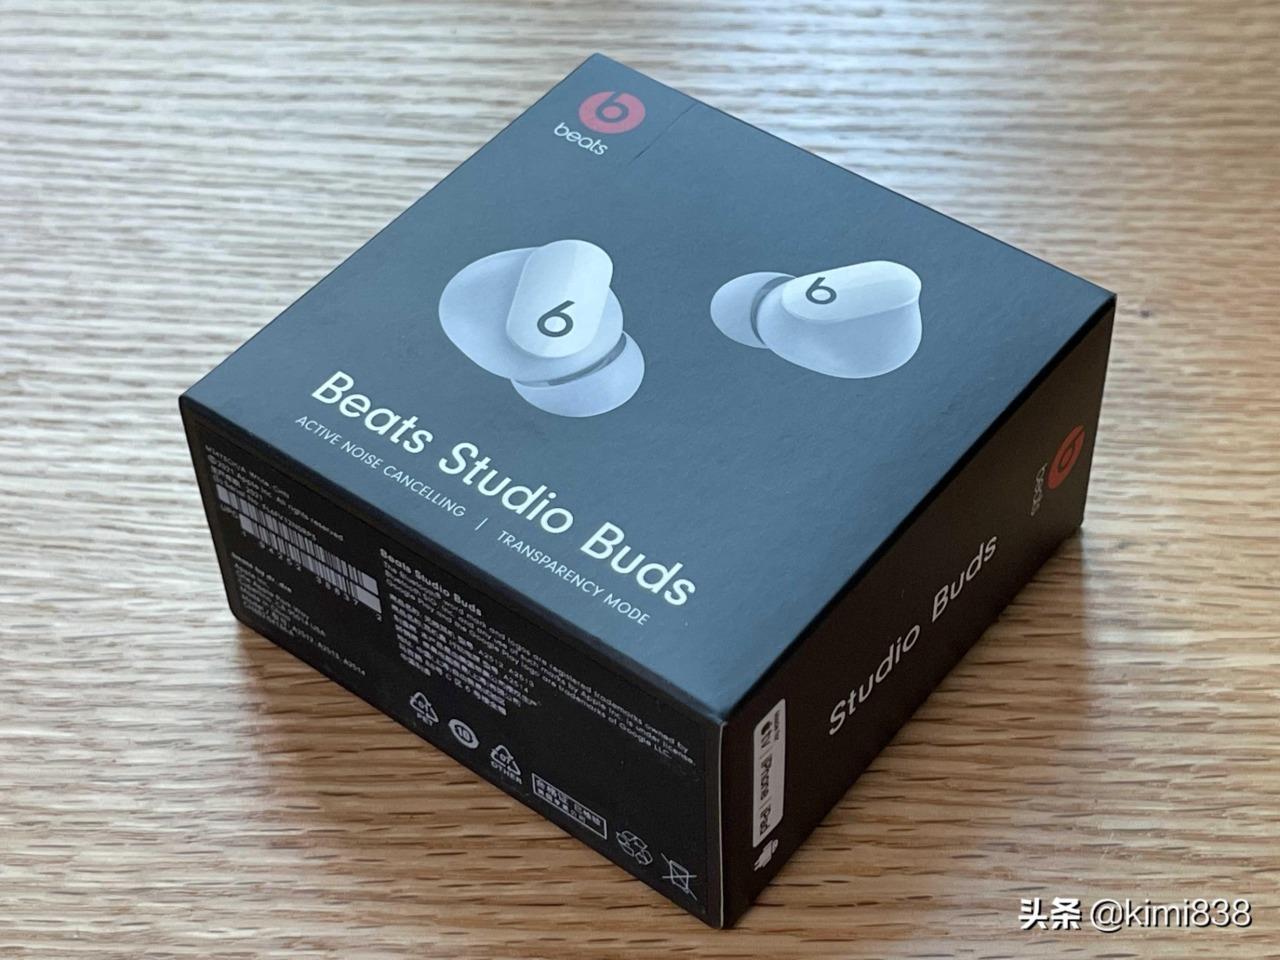 Beats by Dr. Dre Studio Buds Wireless Earbuds - White (‎MJ4X3LL/A